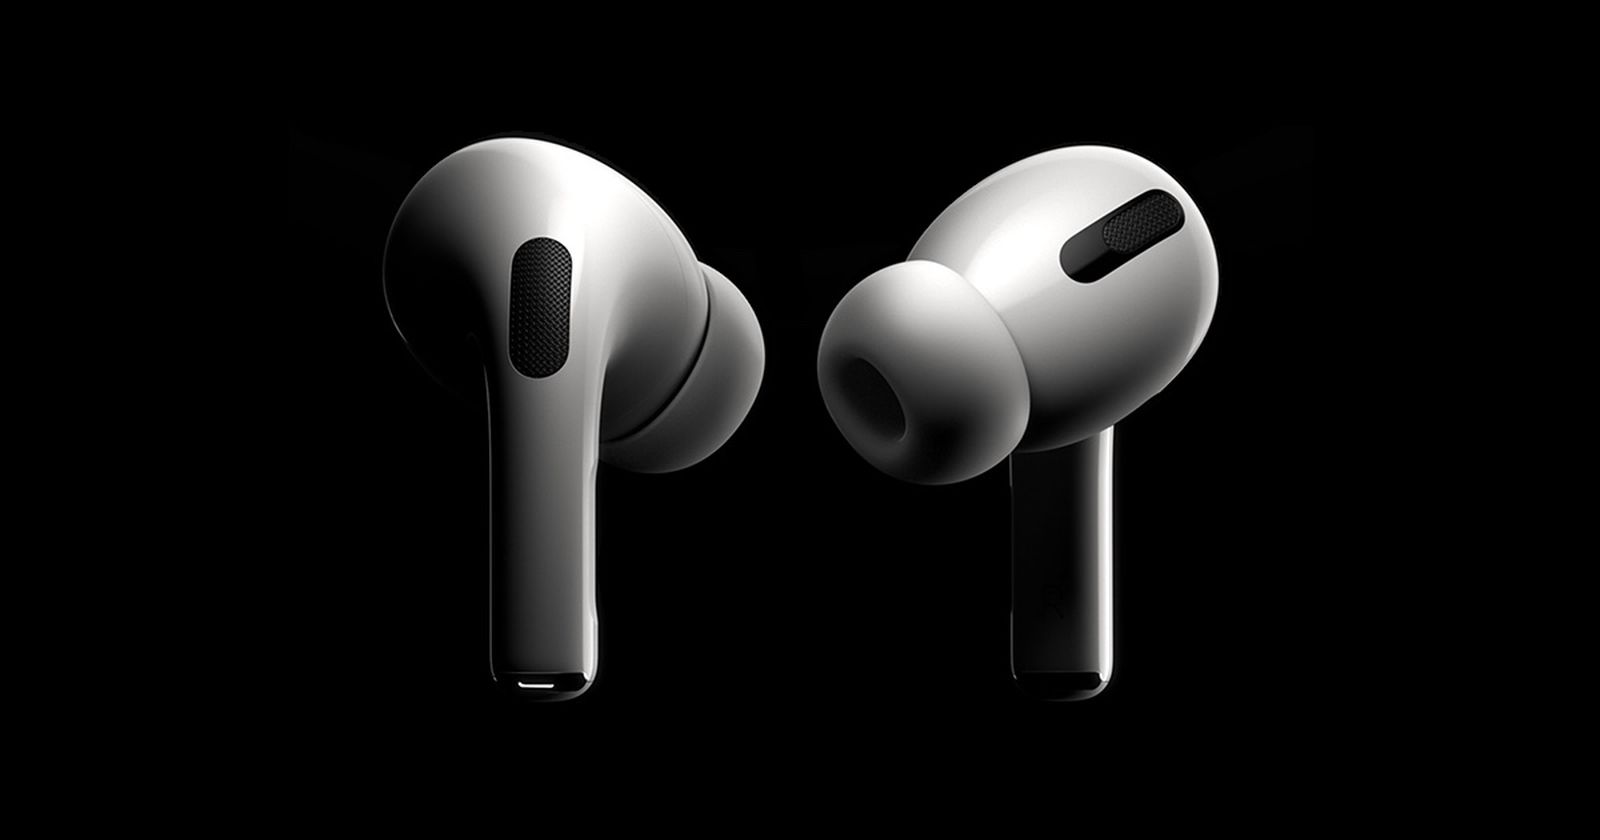 AirPods Pro Development Pushed Apple Toward Less Internal Secrecy and Greater Co..